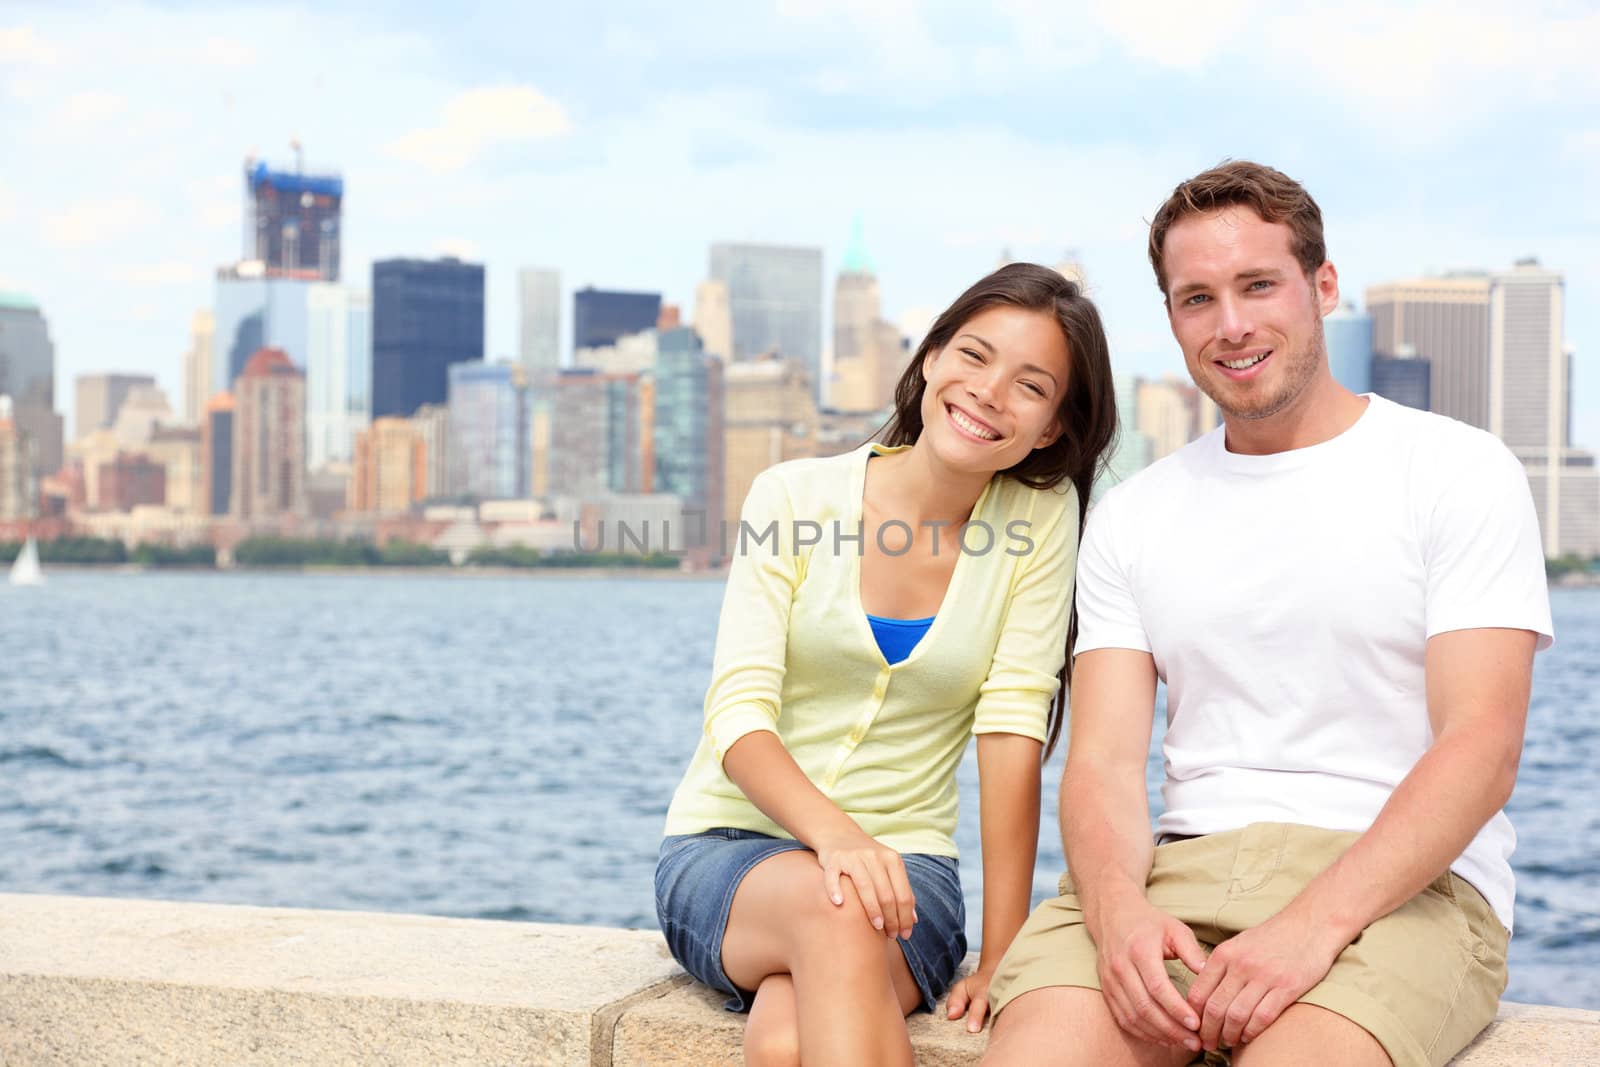 Young couple dating in New York by Maridav